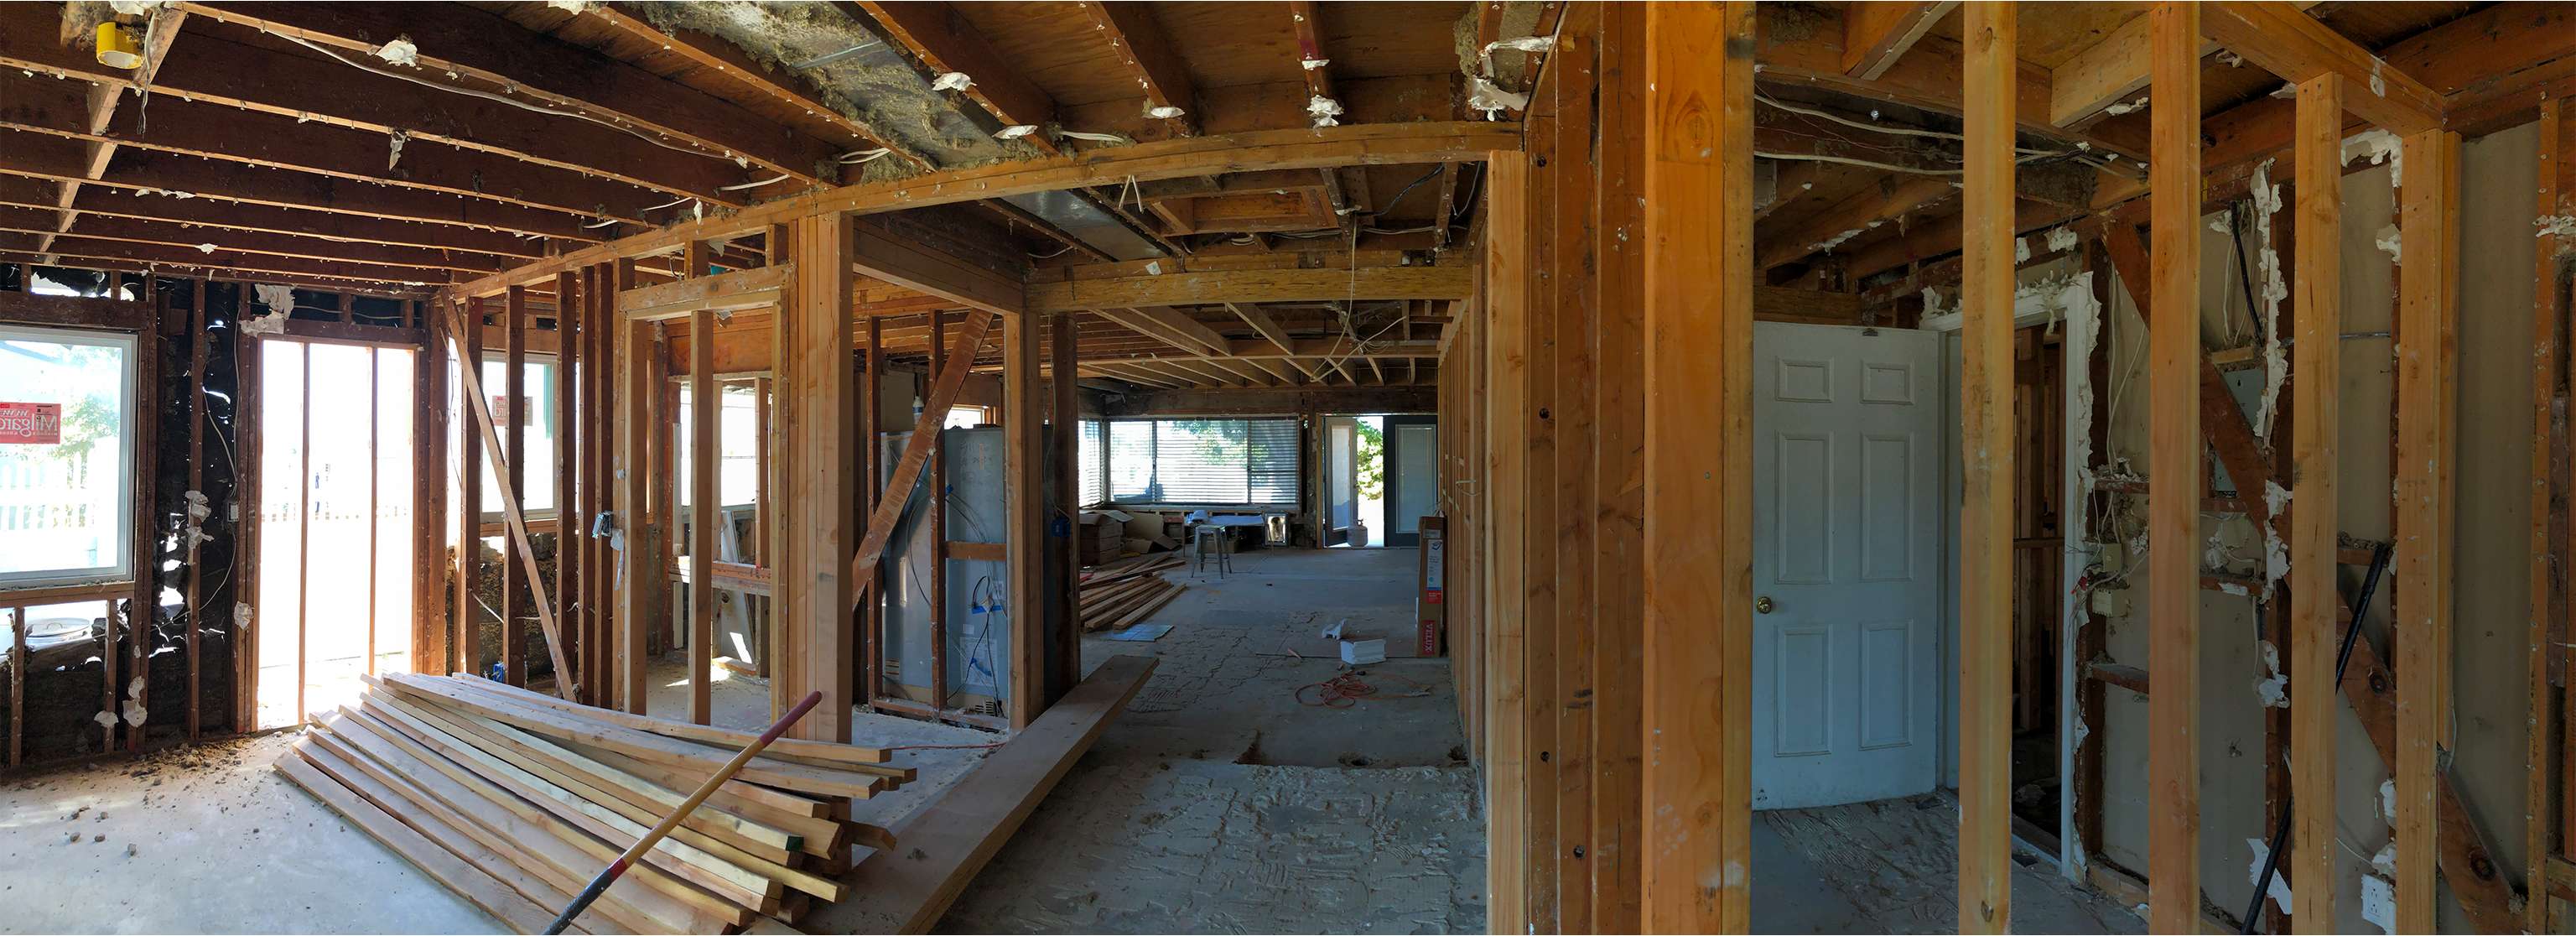 bearing-stud-wall-framing-in-attached-ADU-2nd-floor-addition